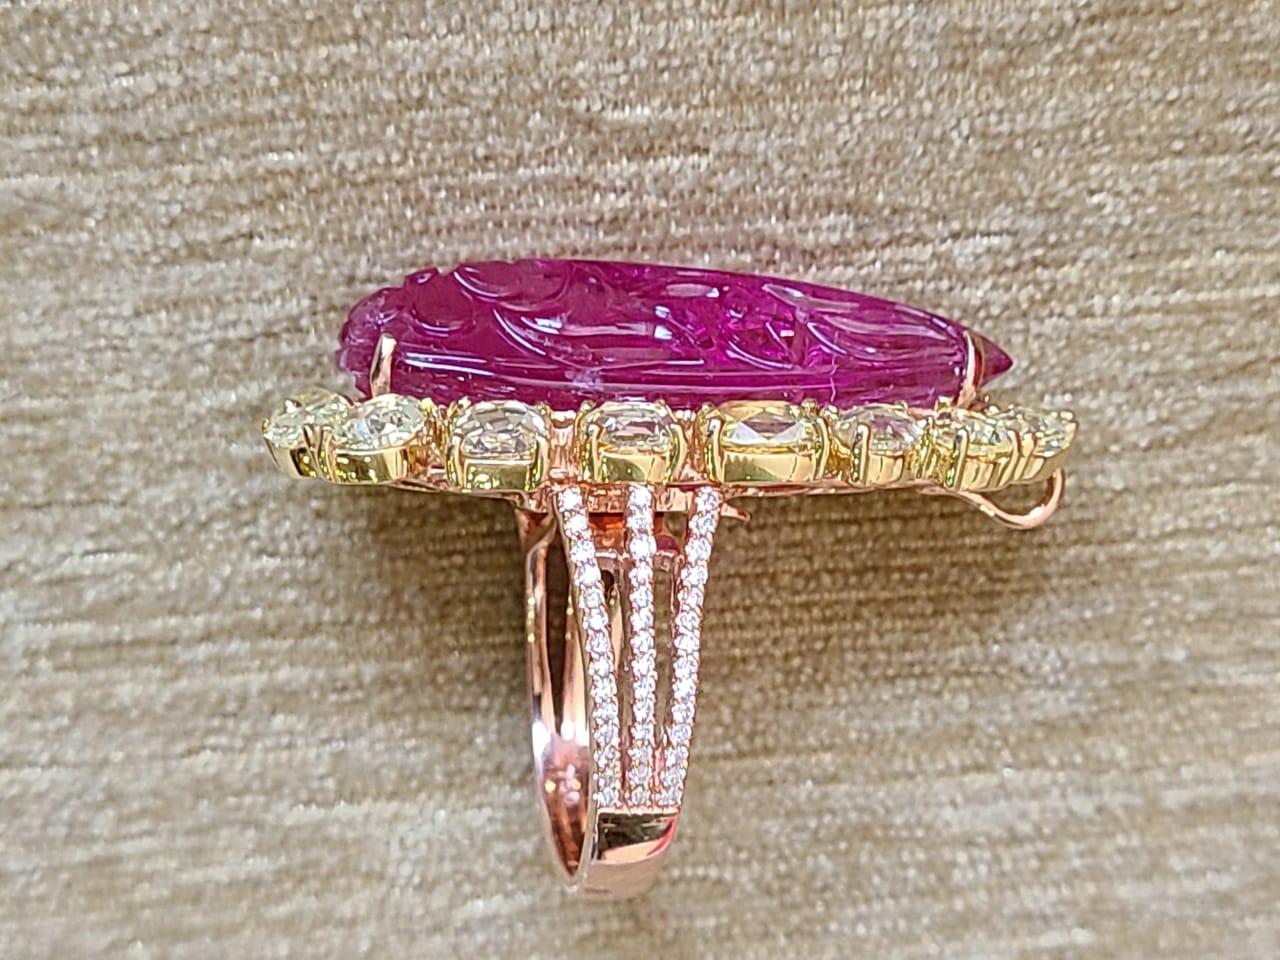 A very beautiful & one of a kind, carved Rubellite Cocktail Ring/ Convertible Pendant set in 18K Gold & Diamonds. The weight of the Rubellite is 19.78 carats. The Rubellite is hand carved in our own workshop. The combined weight of the Diamonds is